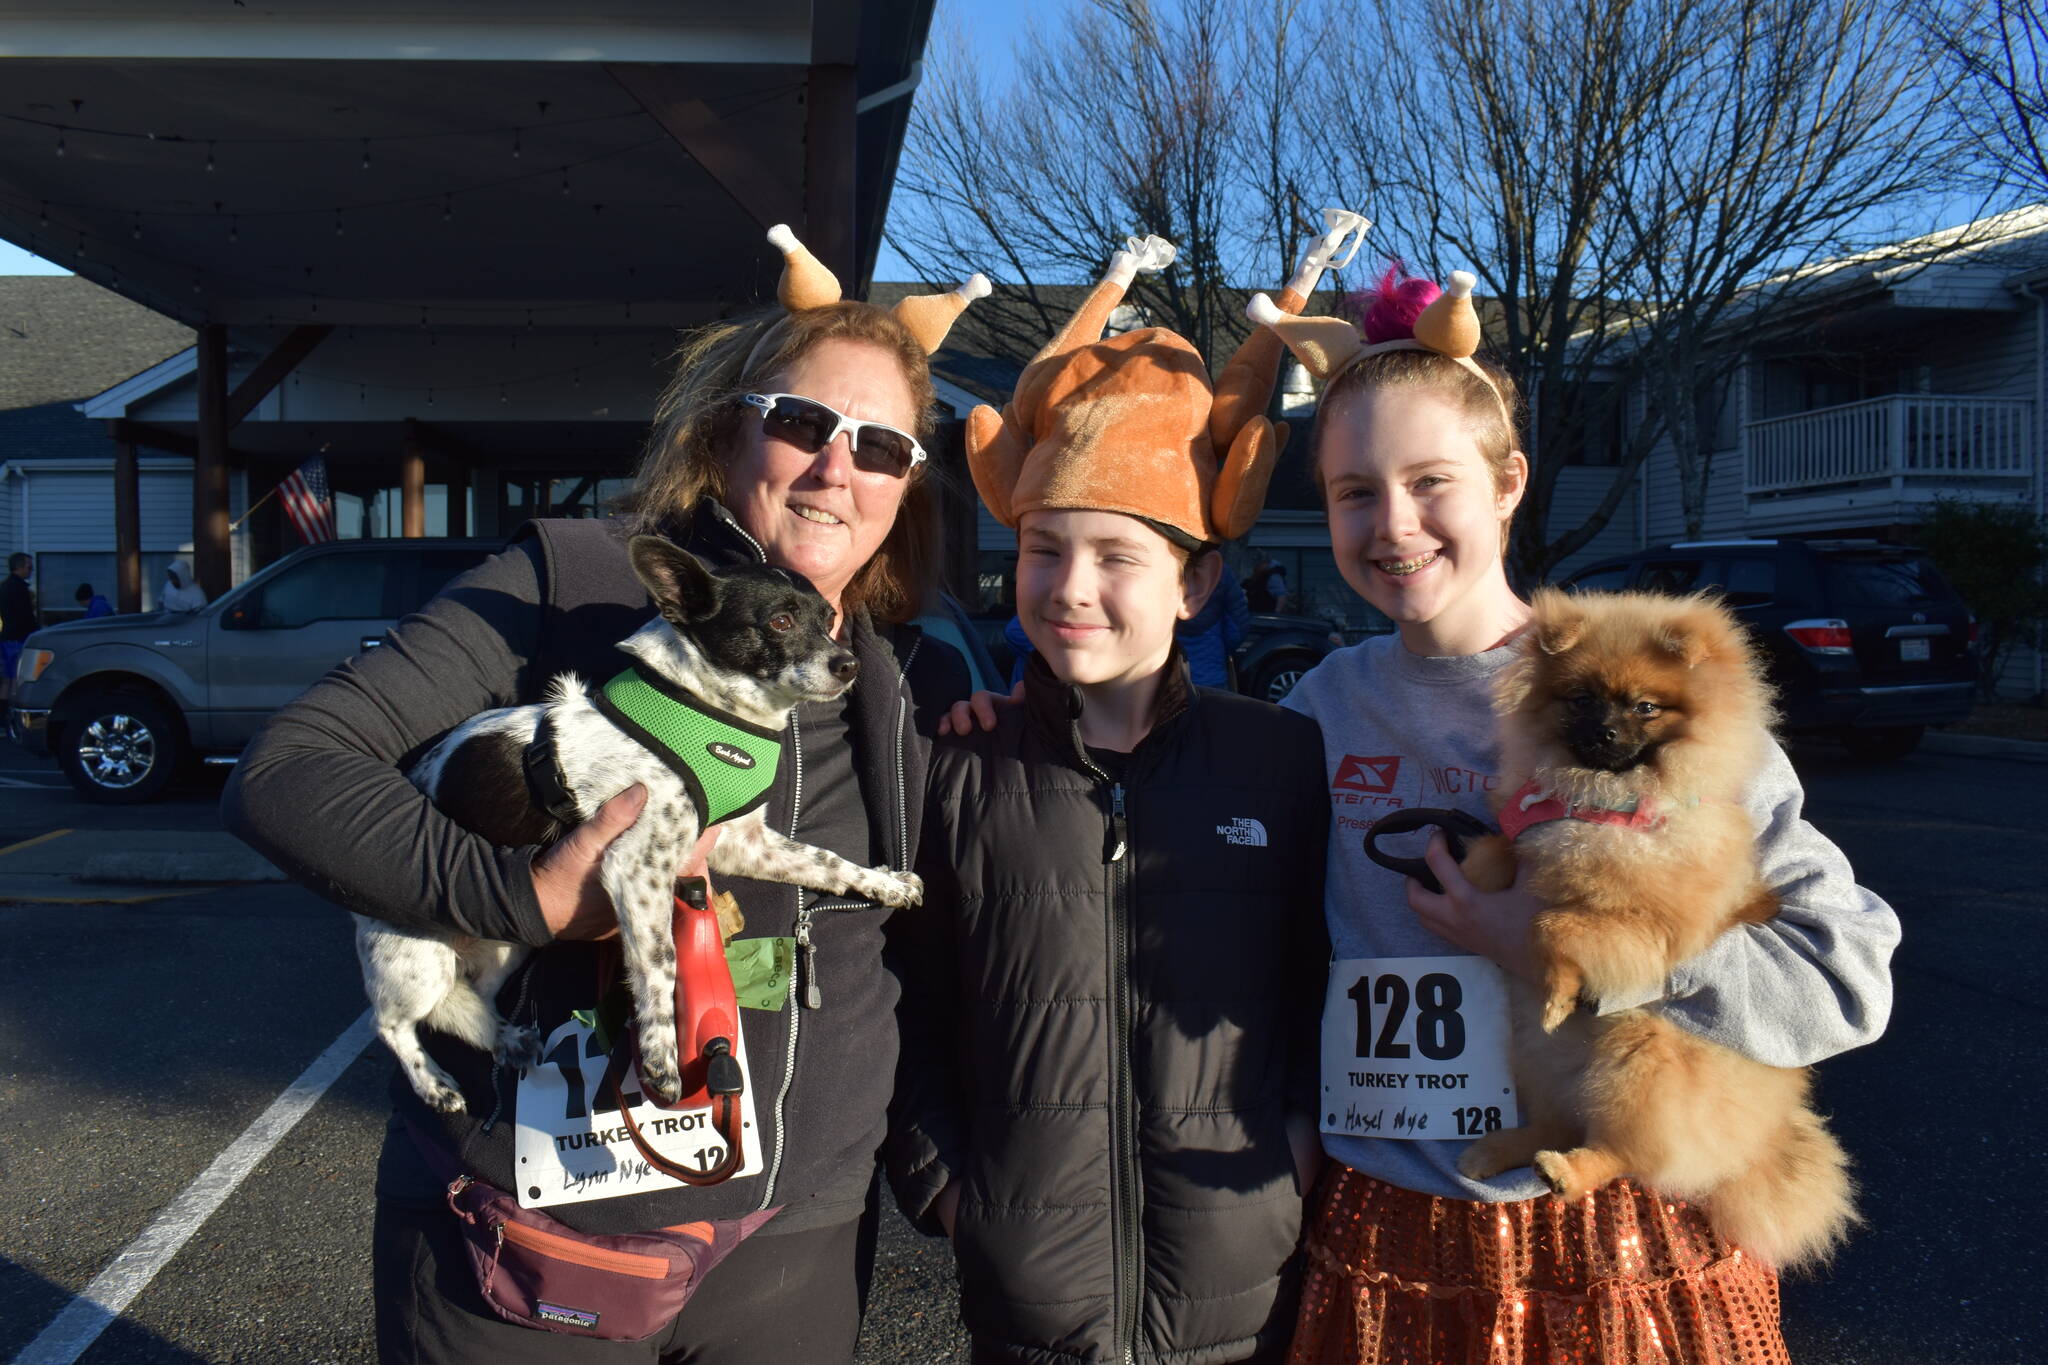 Kelley Balcomb-Bartok\ Staff photo
2022 Turkey Trot Participants prepare for the race. From left, Gram Lynn with Moose, Clive, and Hazel with Jellybean.